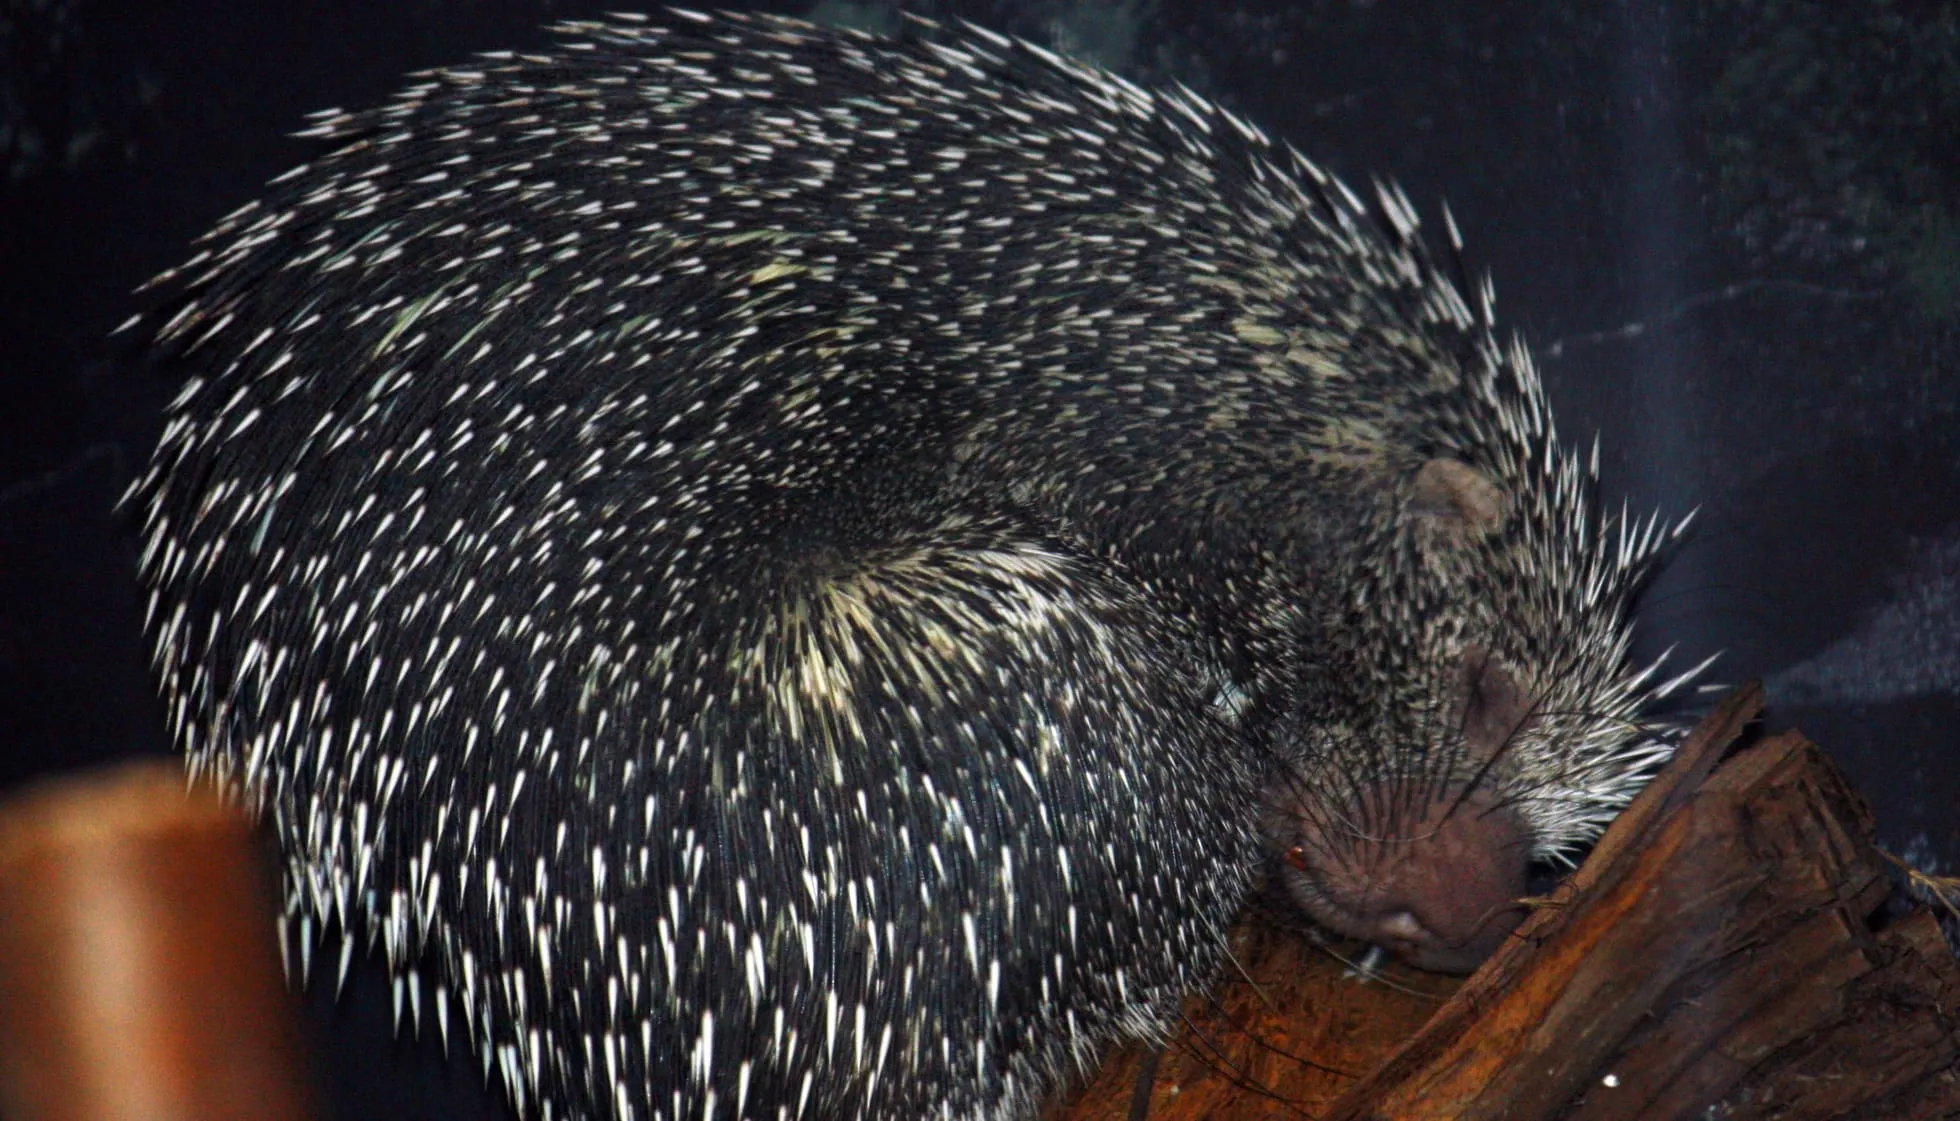 Prehensile-Tailed Porcupine sleeping on a piece of wood